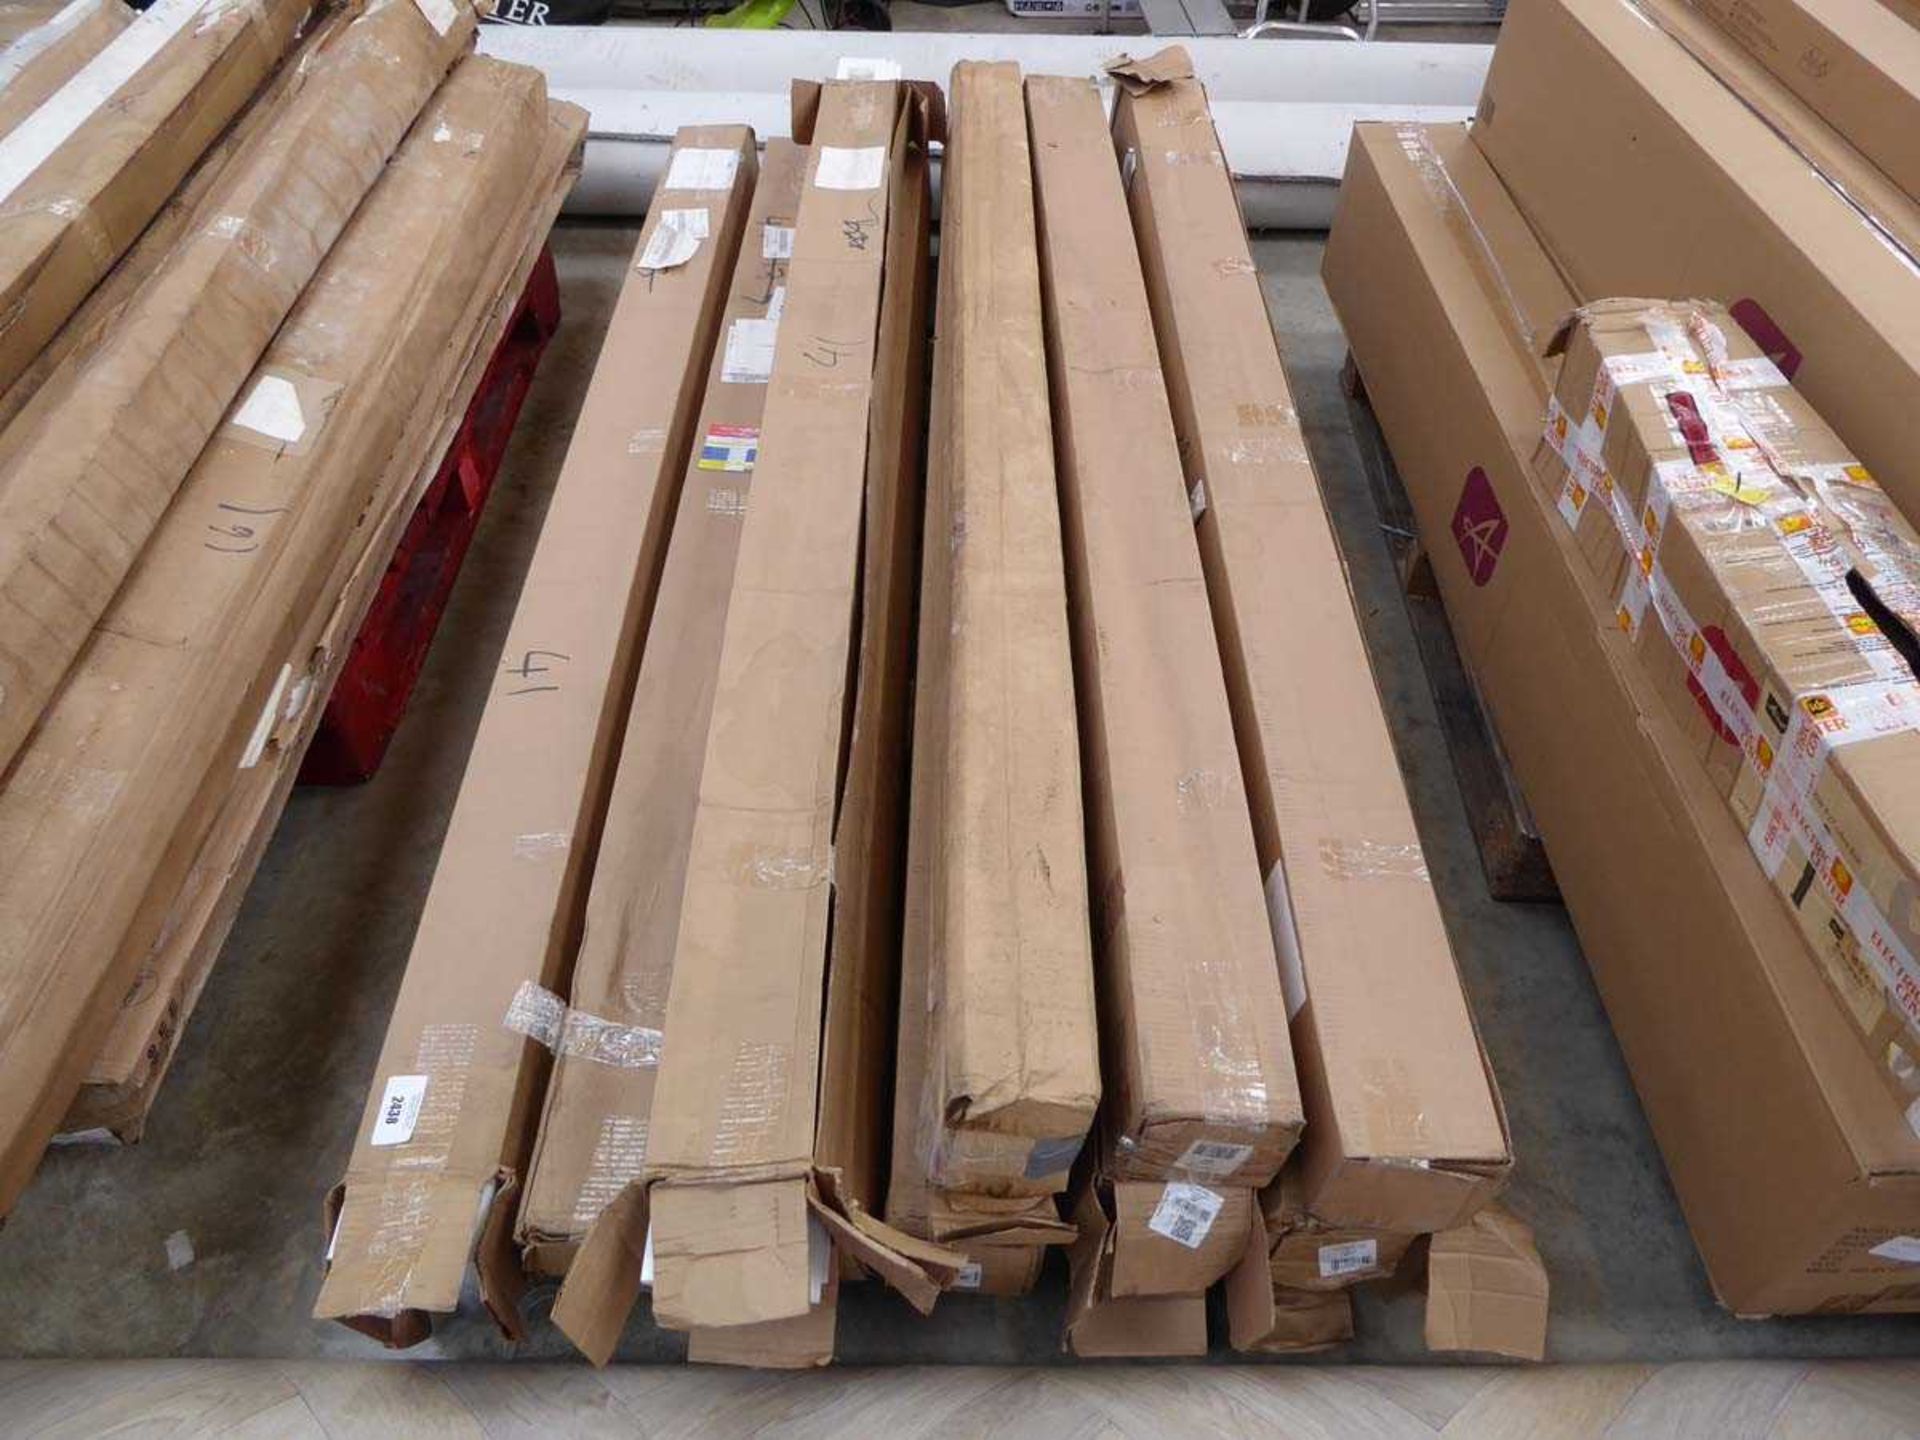 +VAT Pallet containing 10 boxes of Polymer OGEE skirting board (1.5 x 12cm x 2m)